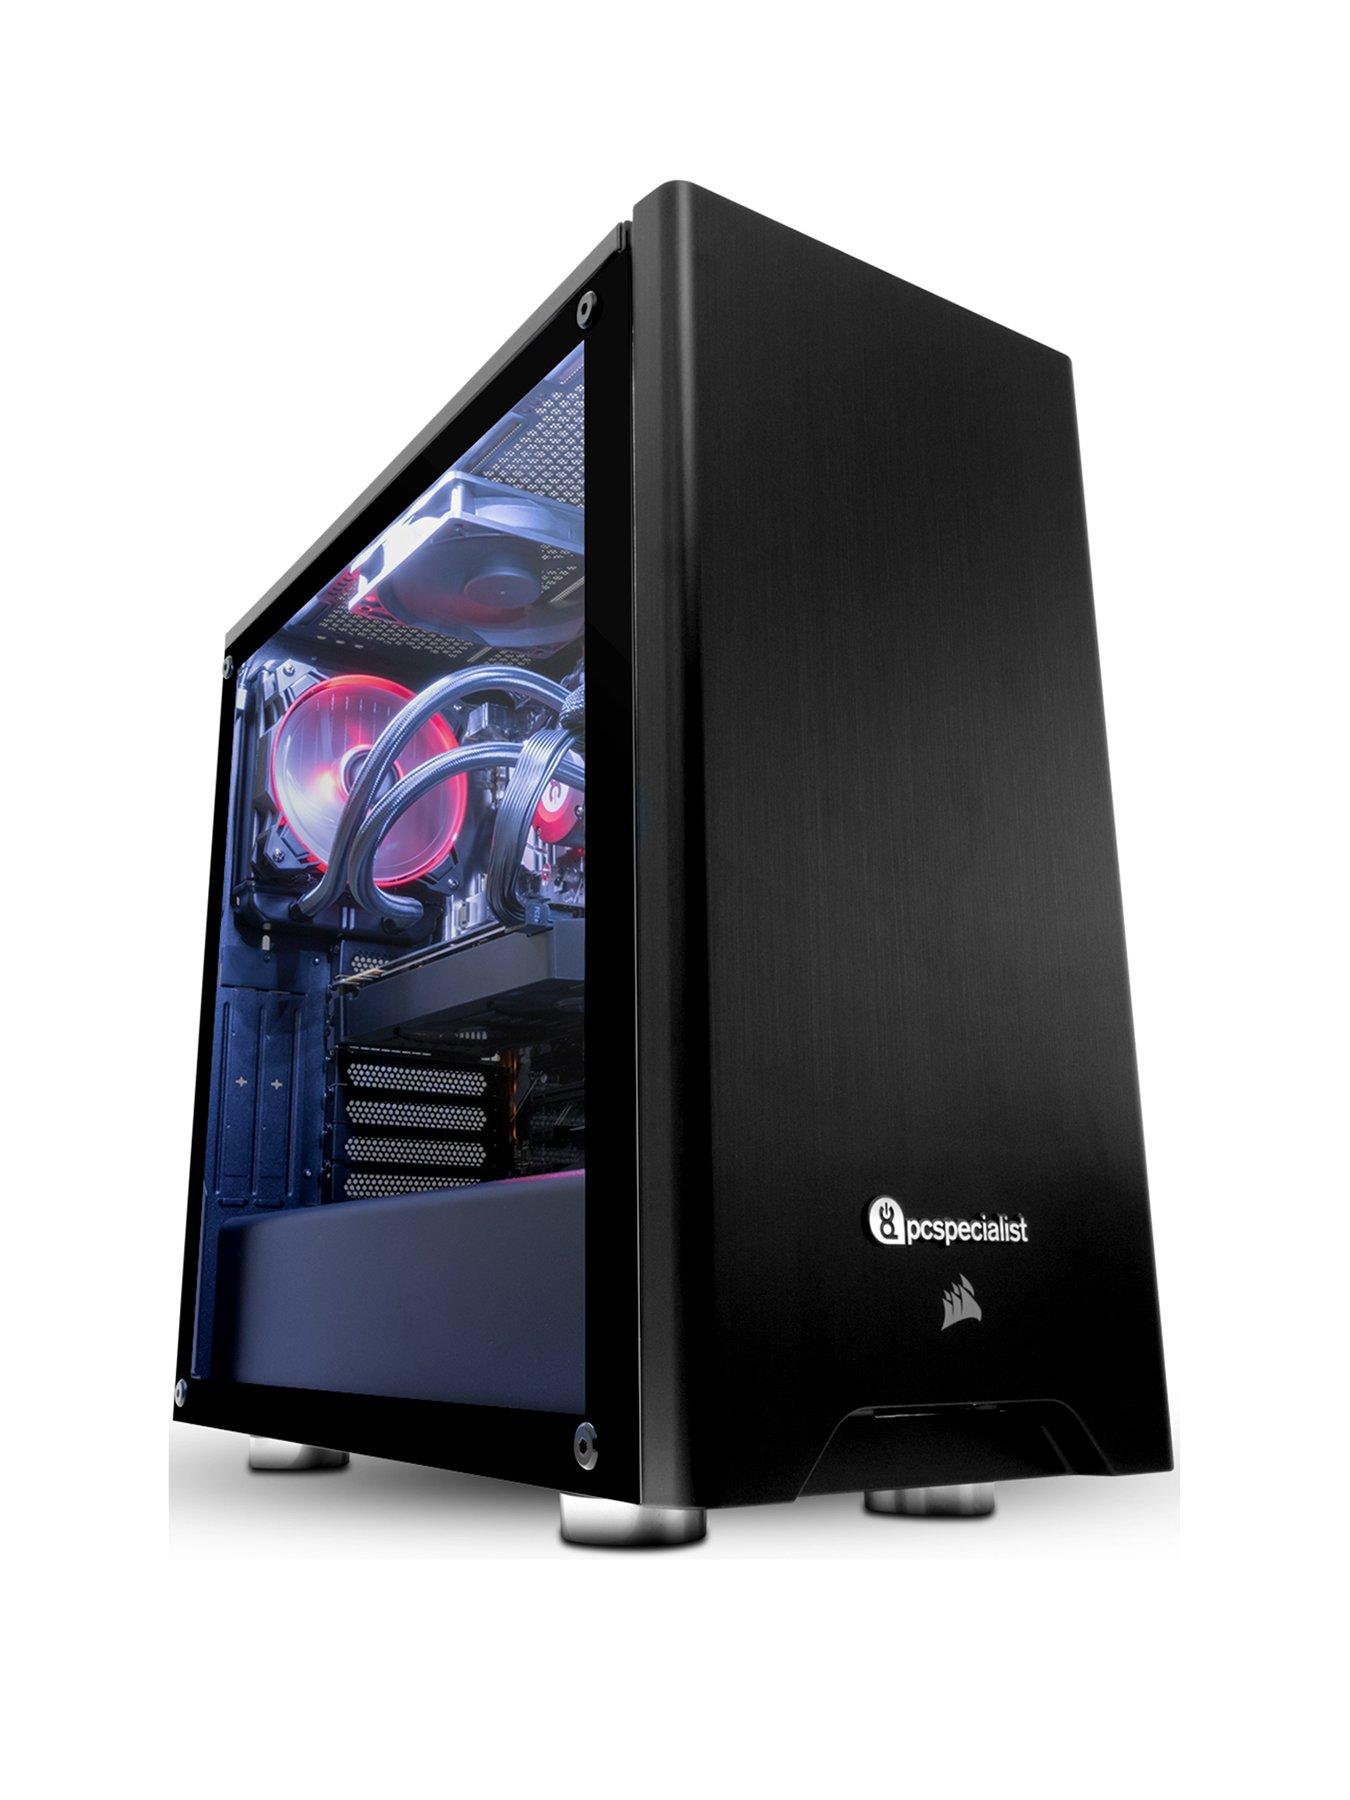 Pc Specialist Tracer Pro 2080 Ti Gaming Desktop Base Unit With Intel I7, 16Gb Ram, 256Gb Ssd &Amp; 2Tb Hard Drive, 11Gb Nvidia Geforce Rtx 2080 Ti Graphics  + Call Of Duty Black Ops 4